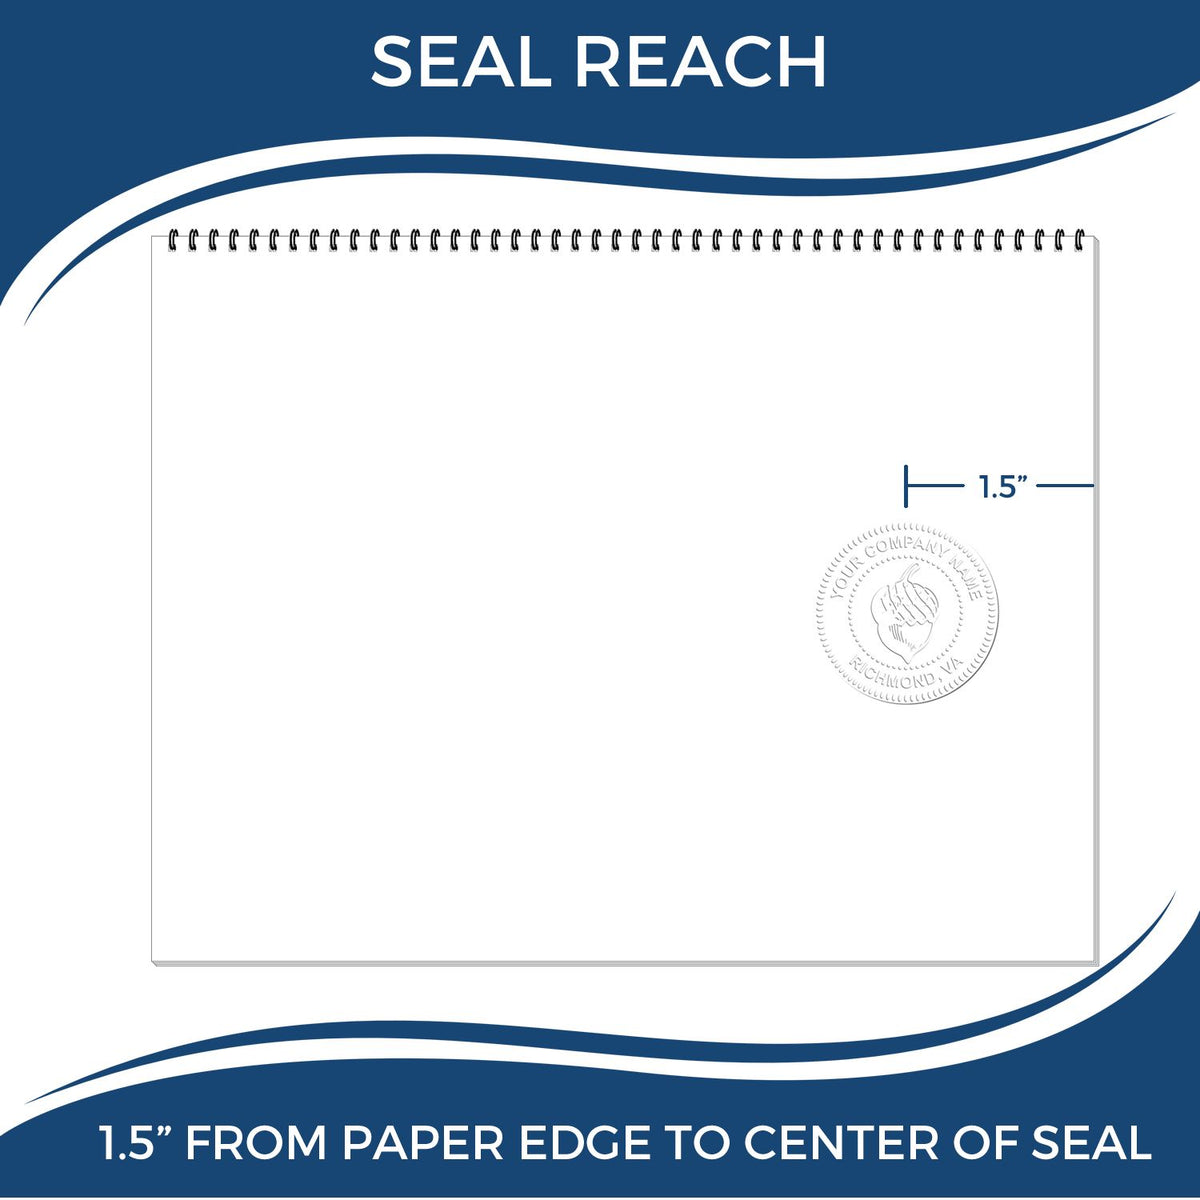 An infographic showing the seal reach which is represented by a ruler and a miniature seal image of the Soft Idaho Professional Geologist Seal